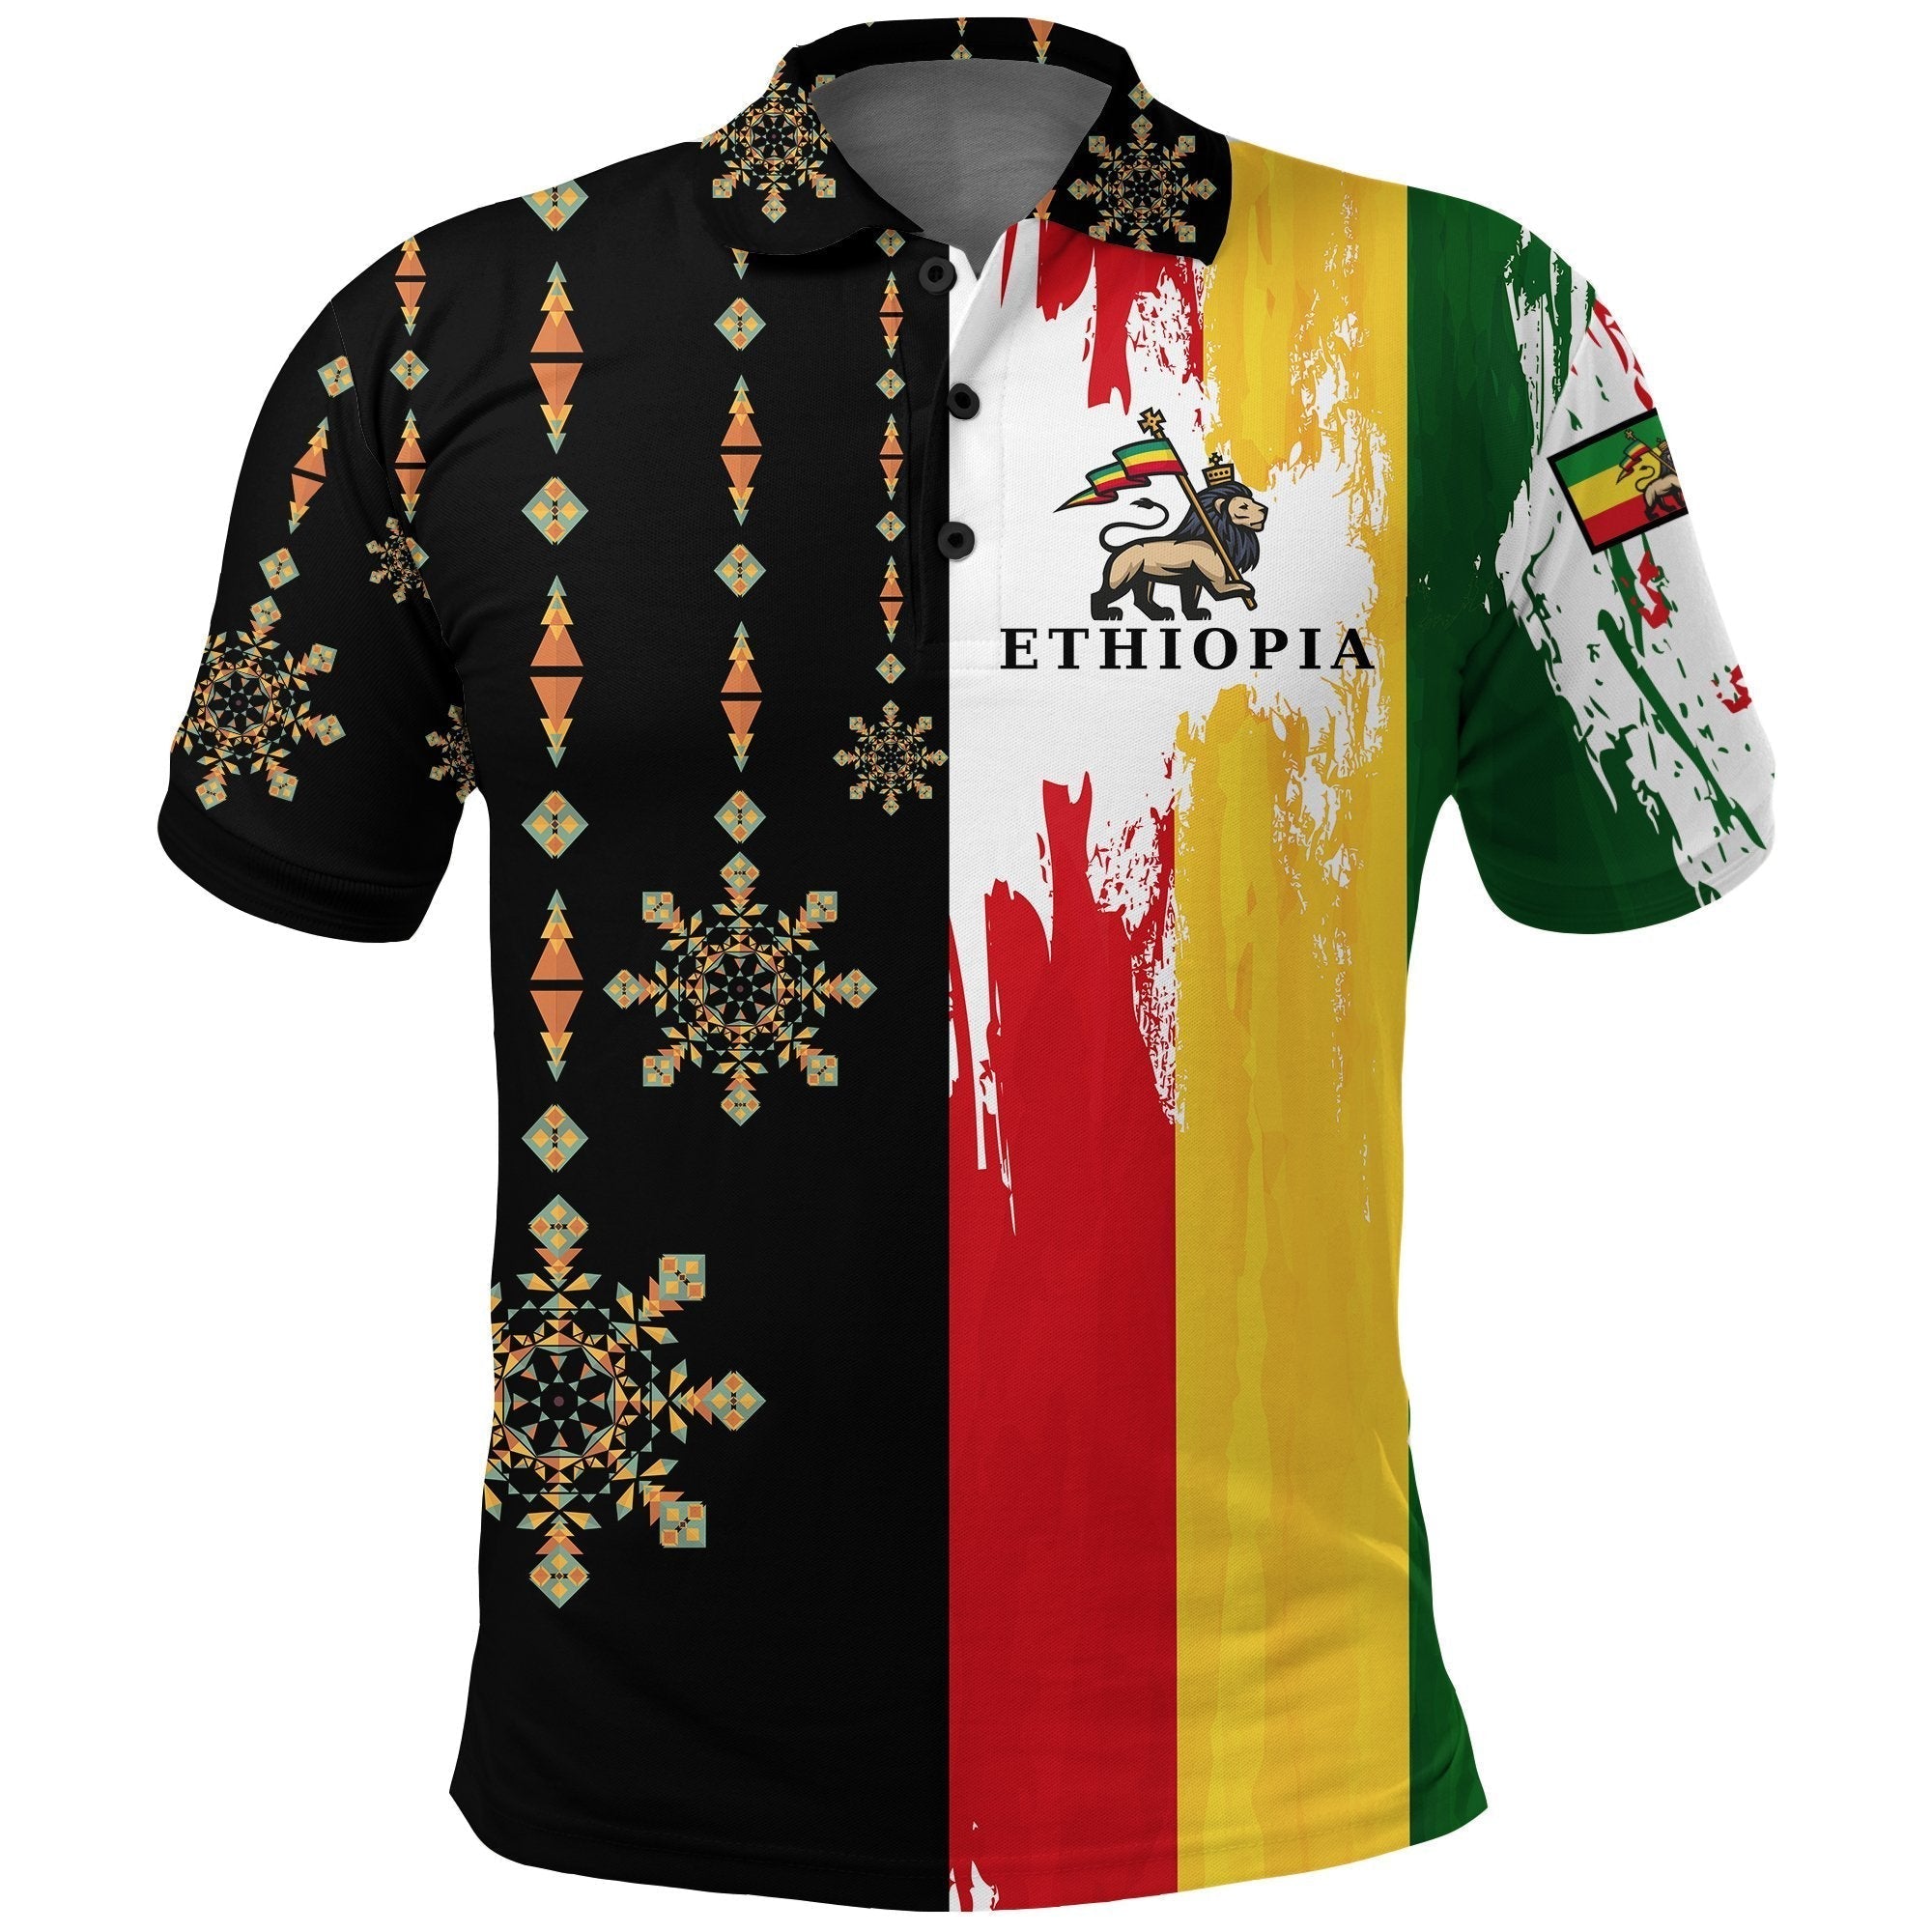 ethiopia-polo-shirt-flags-color-with-aztec-pattern